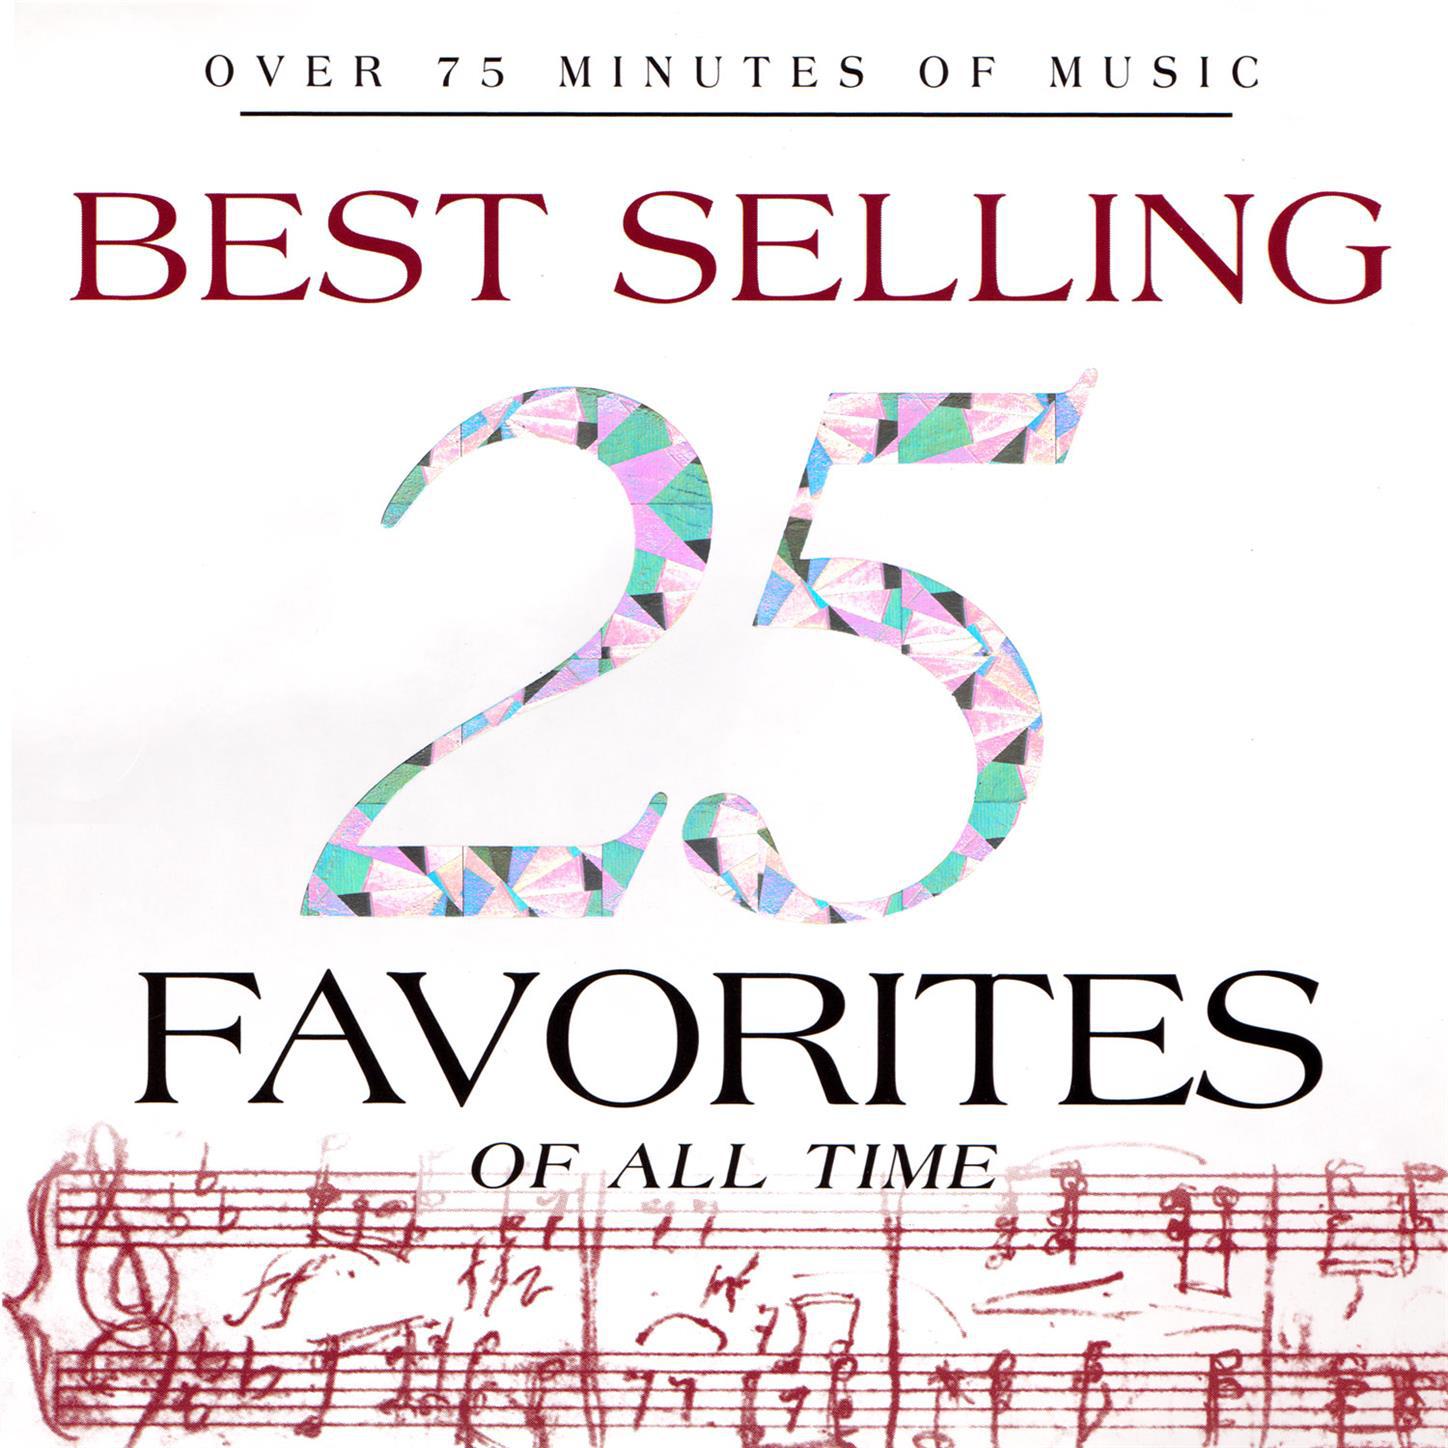 25 Best Selling Favorites of All Time